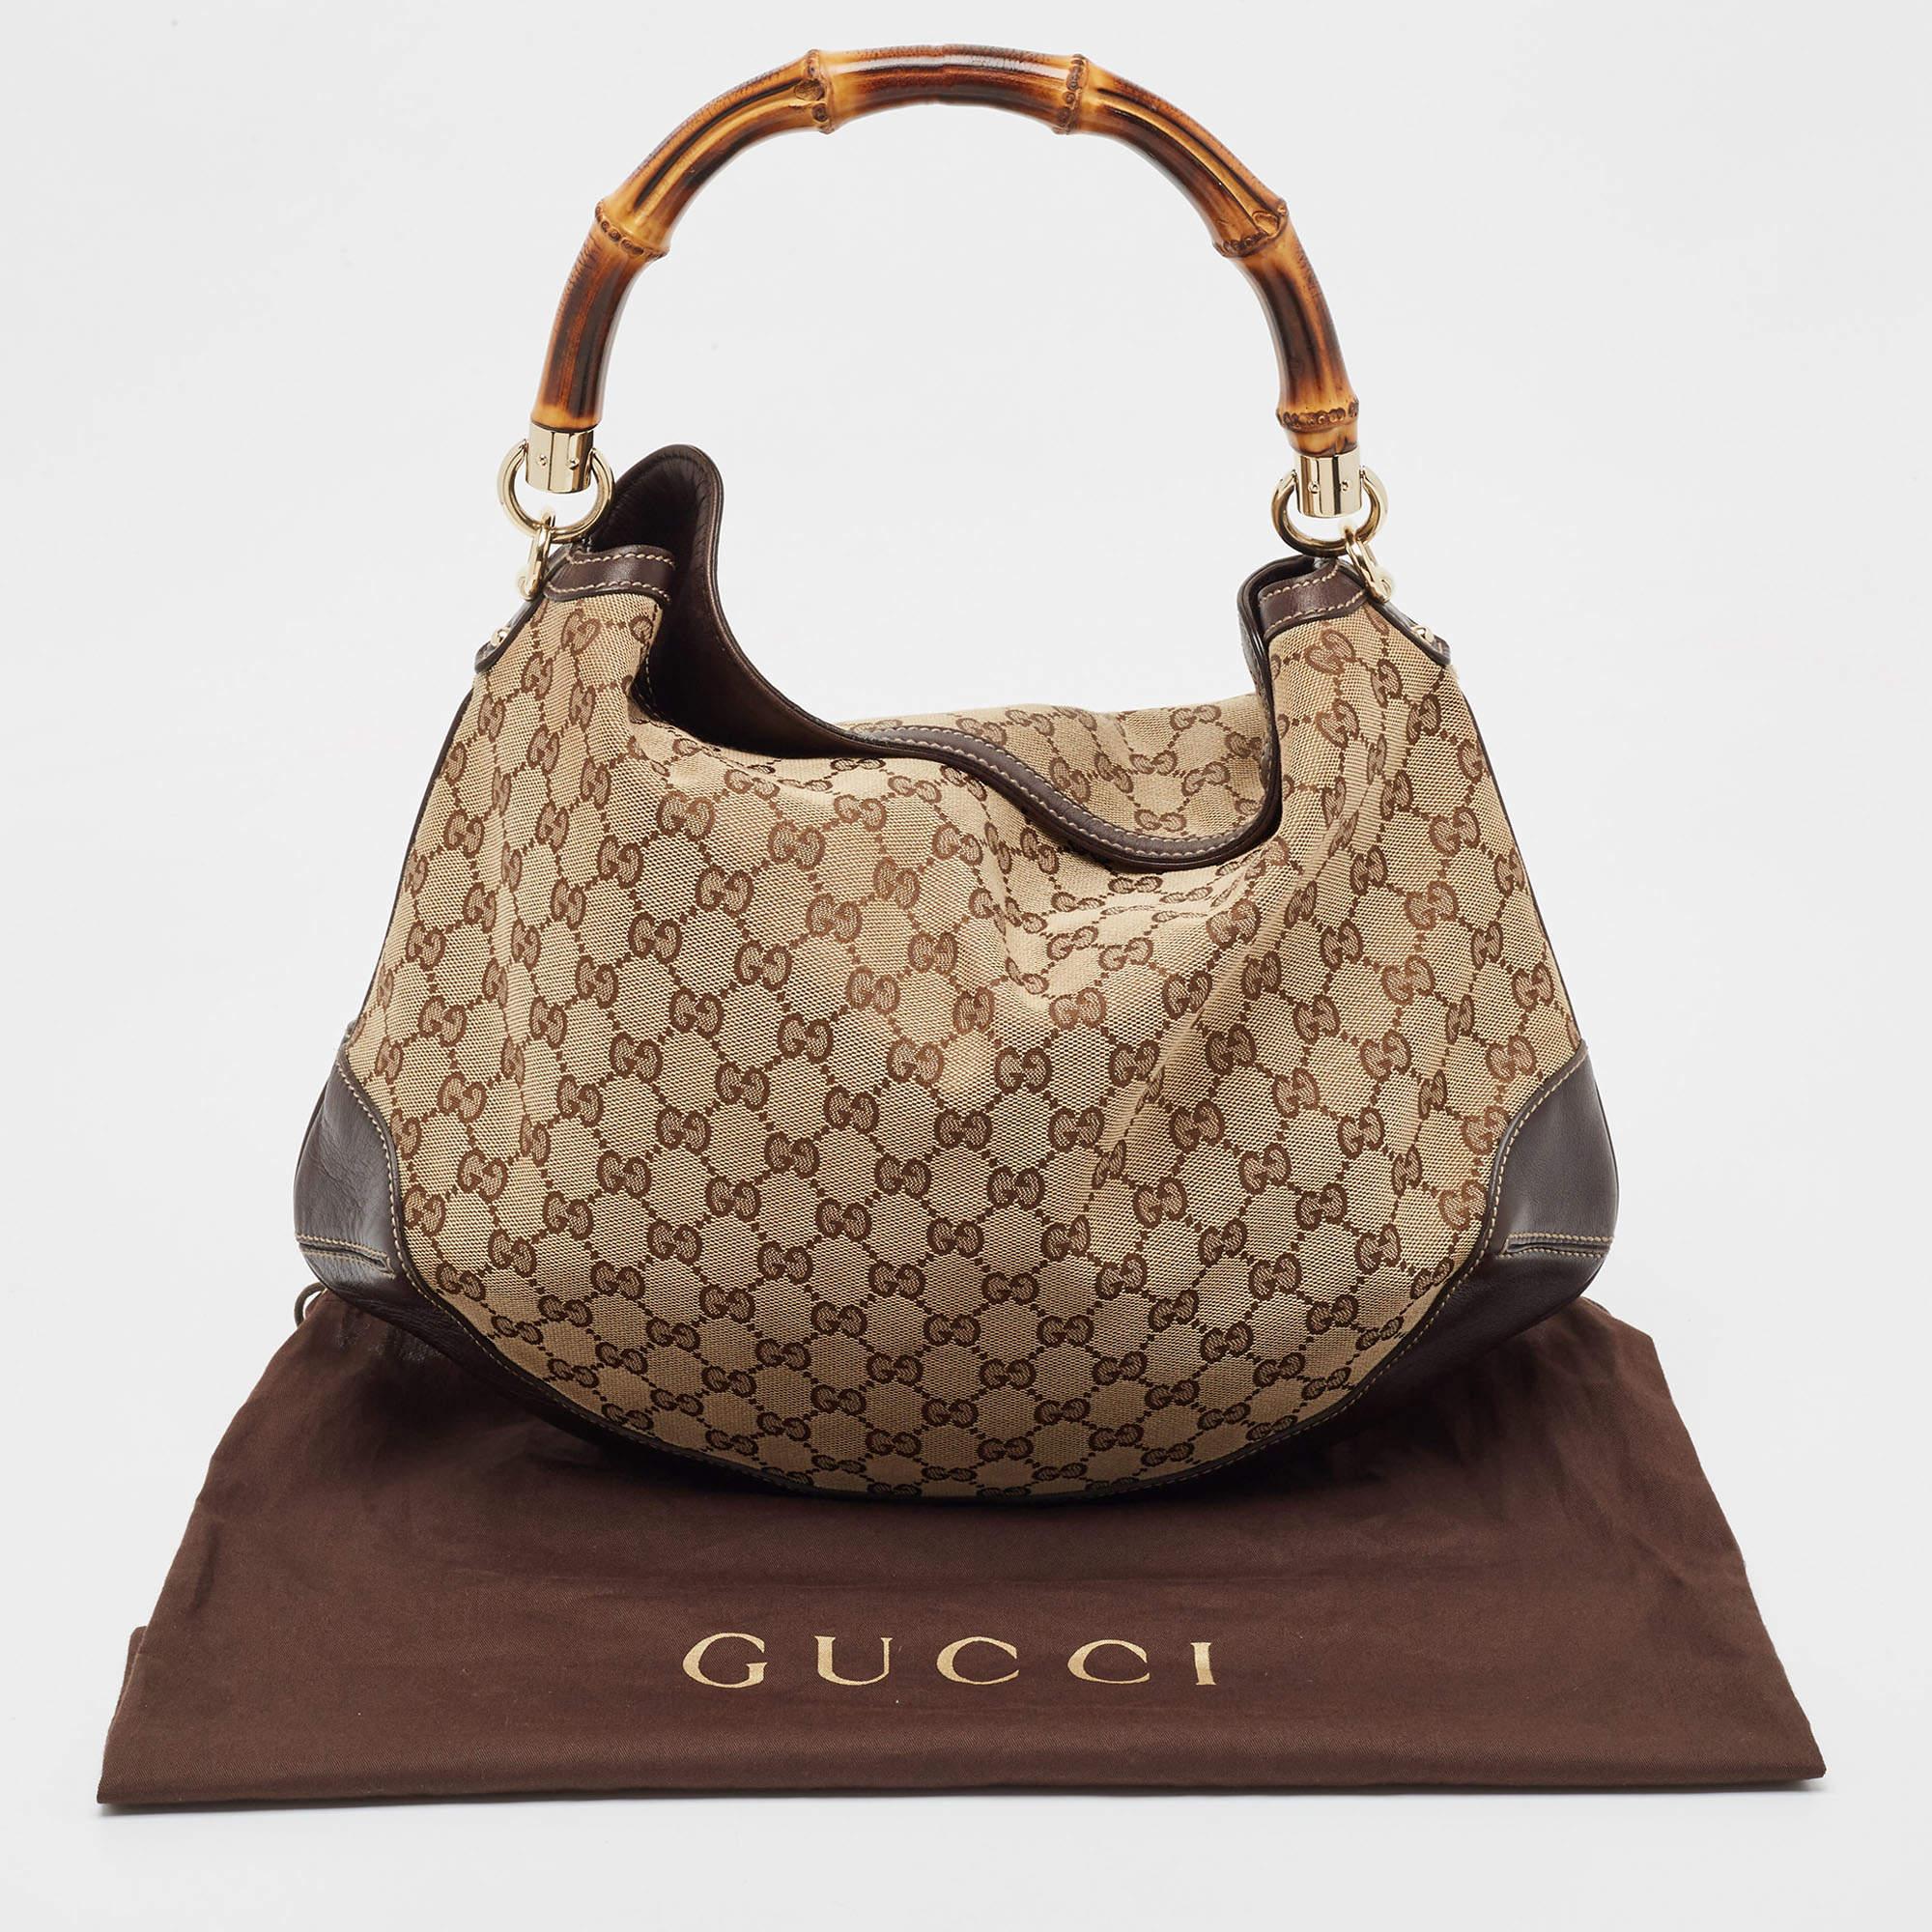 Gucci Beige/Ebony GG Canvas and Leather Bamboo Shoulder Bag 6